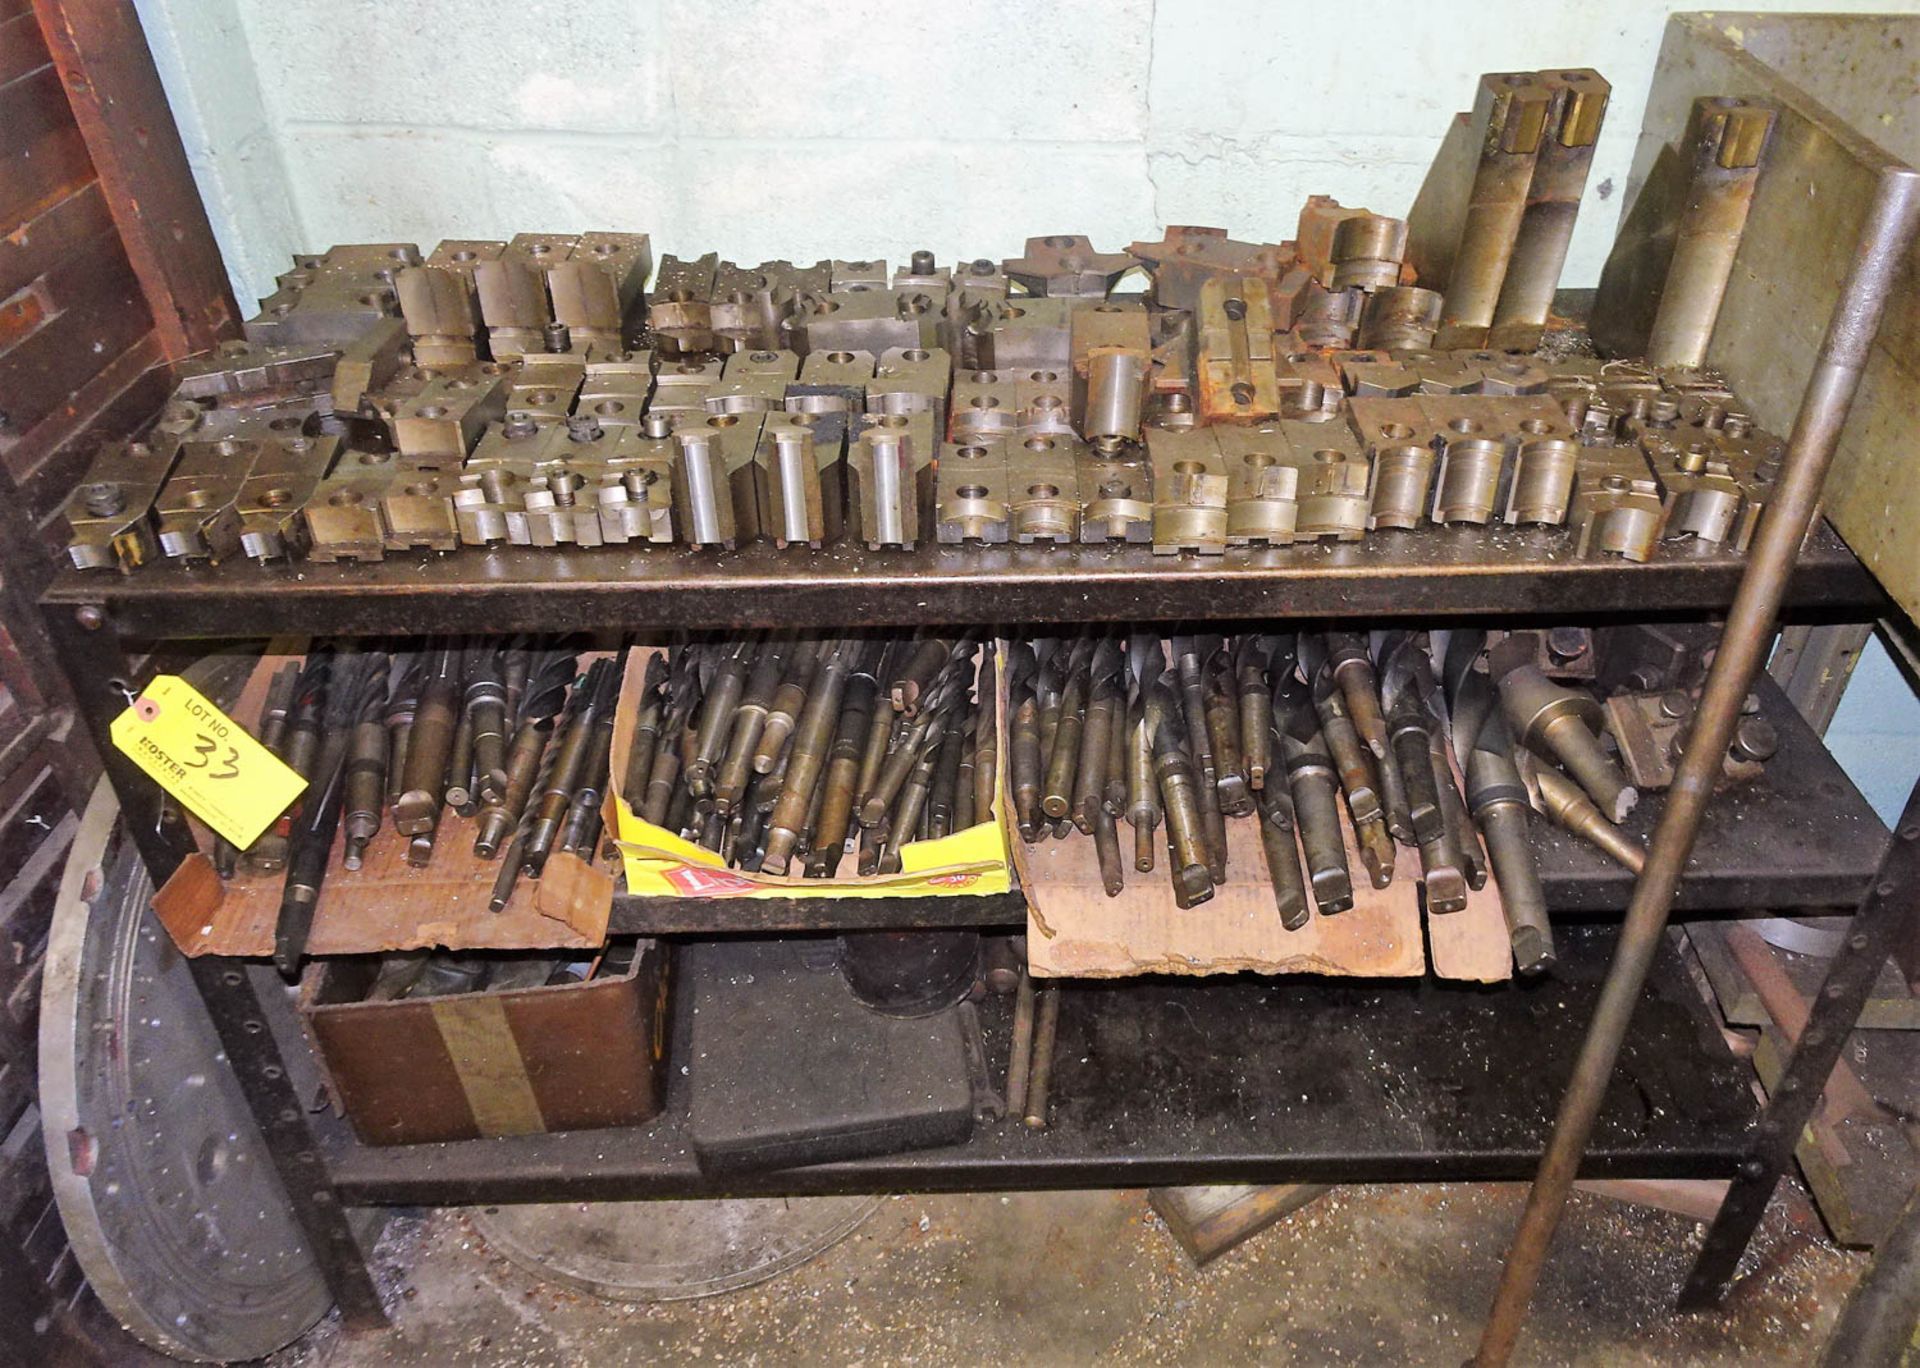 METAL SHELVING UNIT WITH CONTENTS, INCLUDING: NUMEROUS CHUCK JAWS AND DRILL BITS